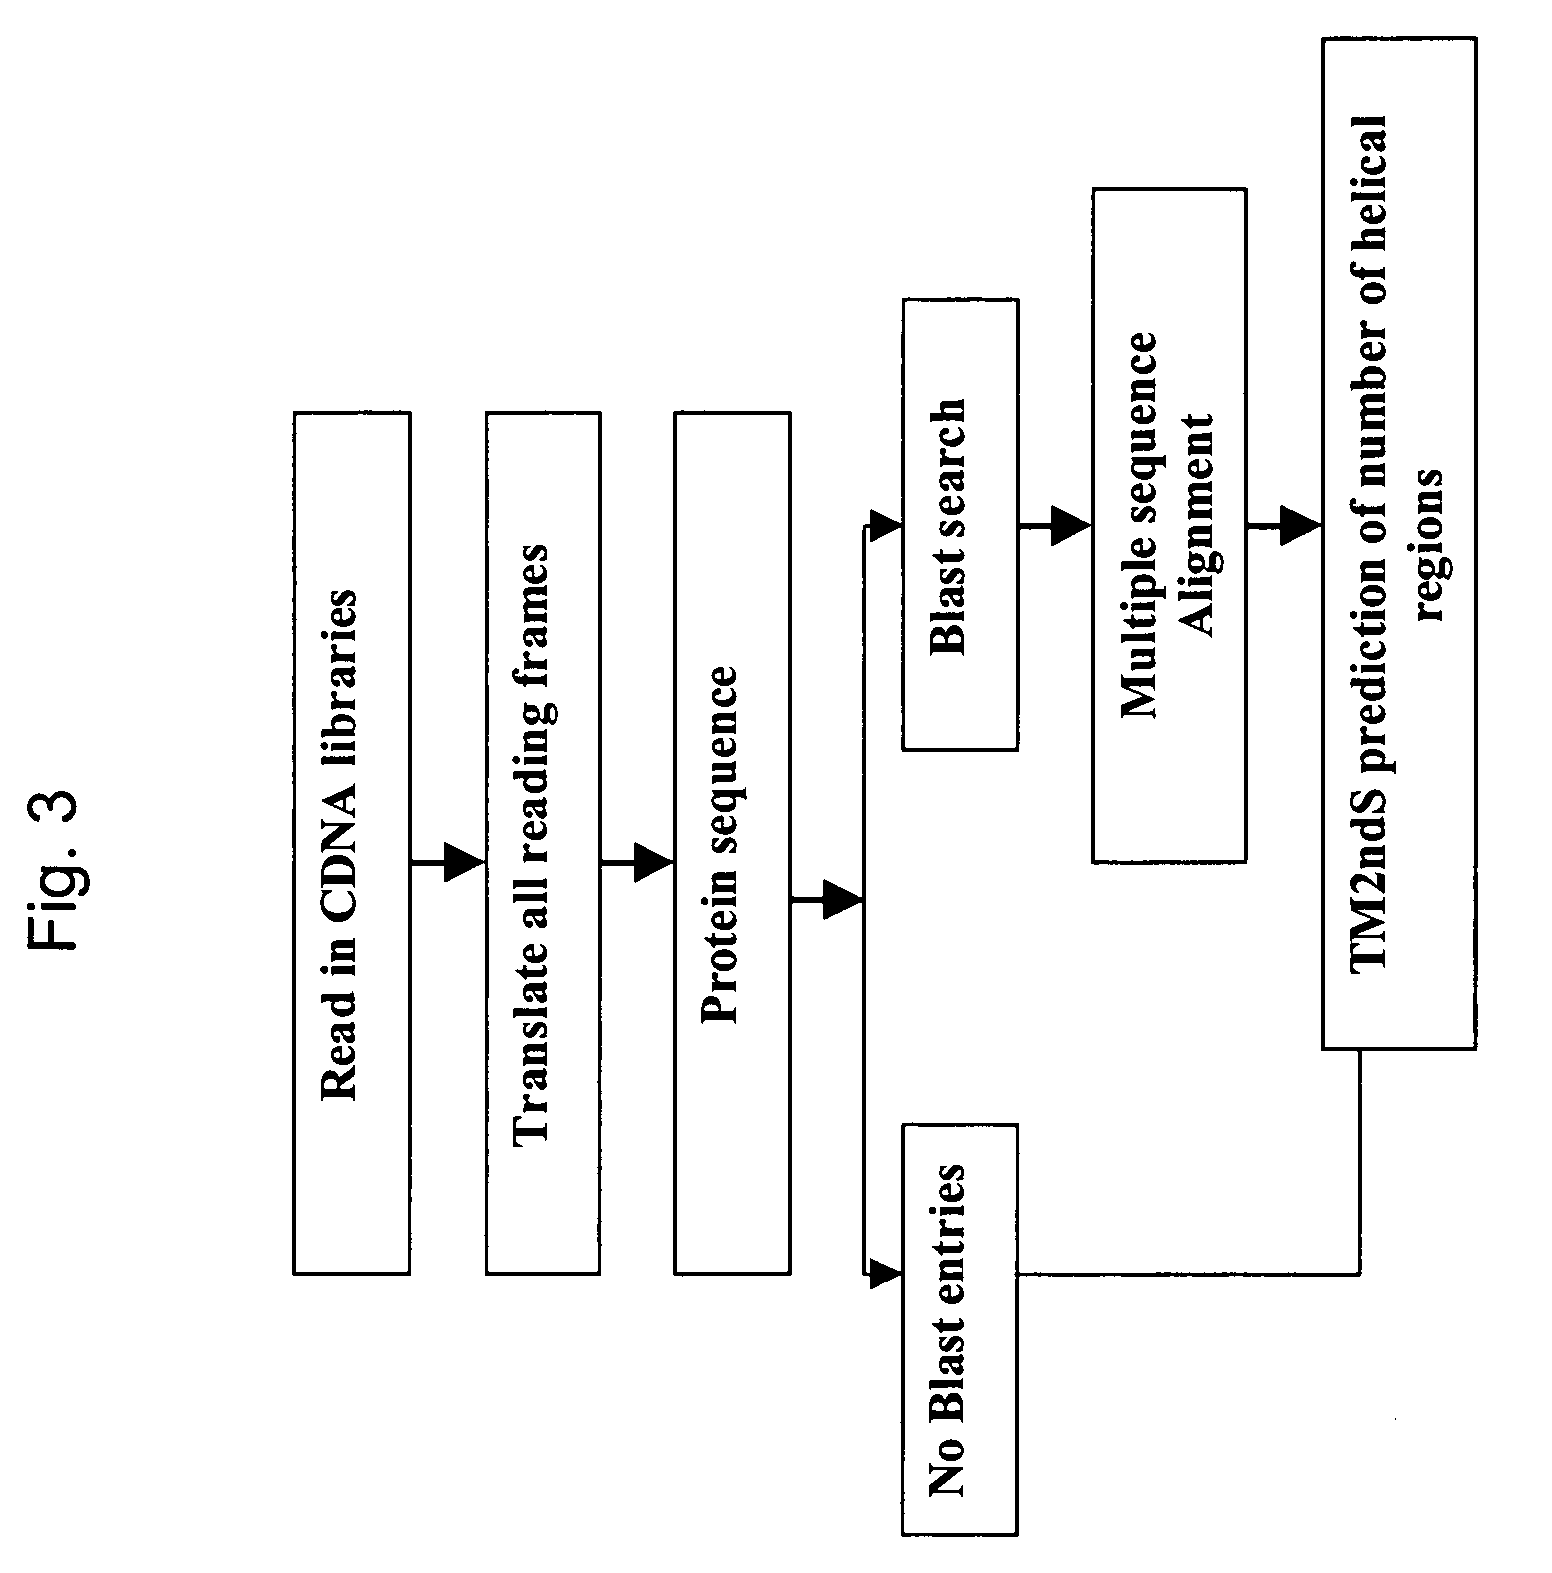 System and methods for predicting transmembrane domains in membrane proteins and mining the genome for recognizing G-protein coupled receptors